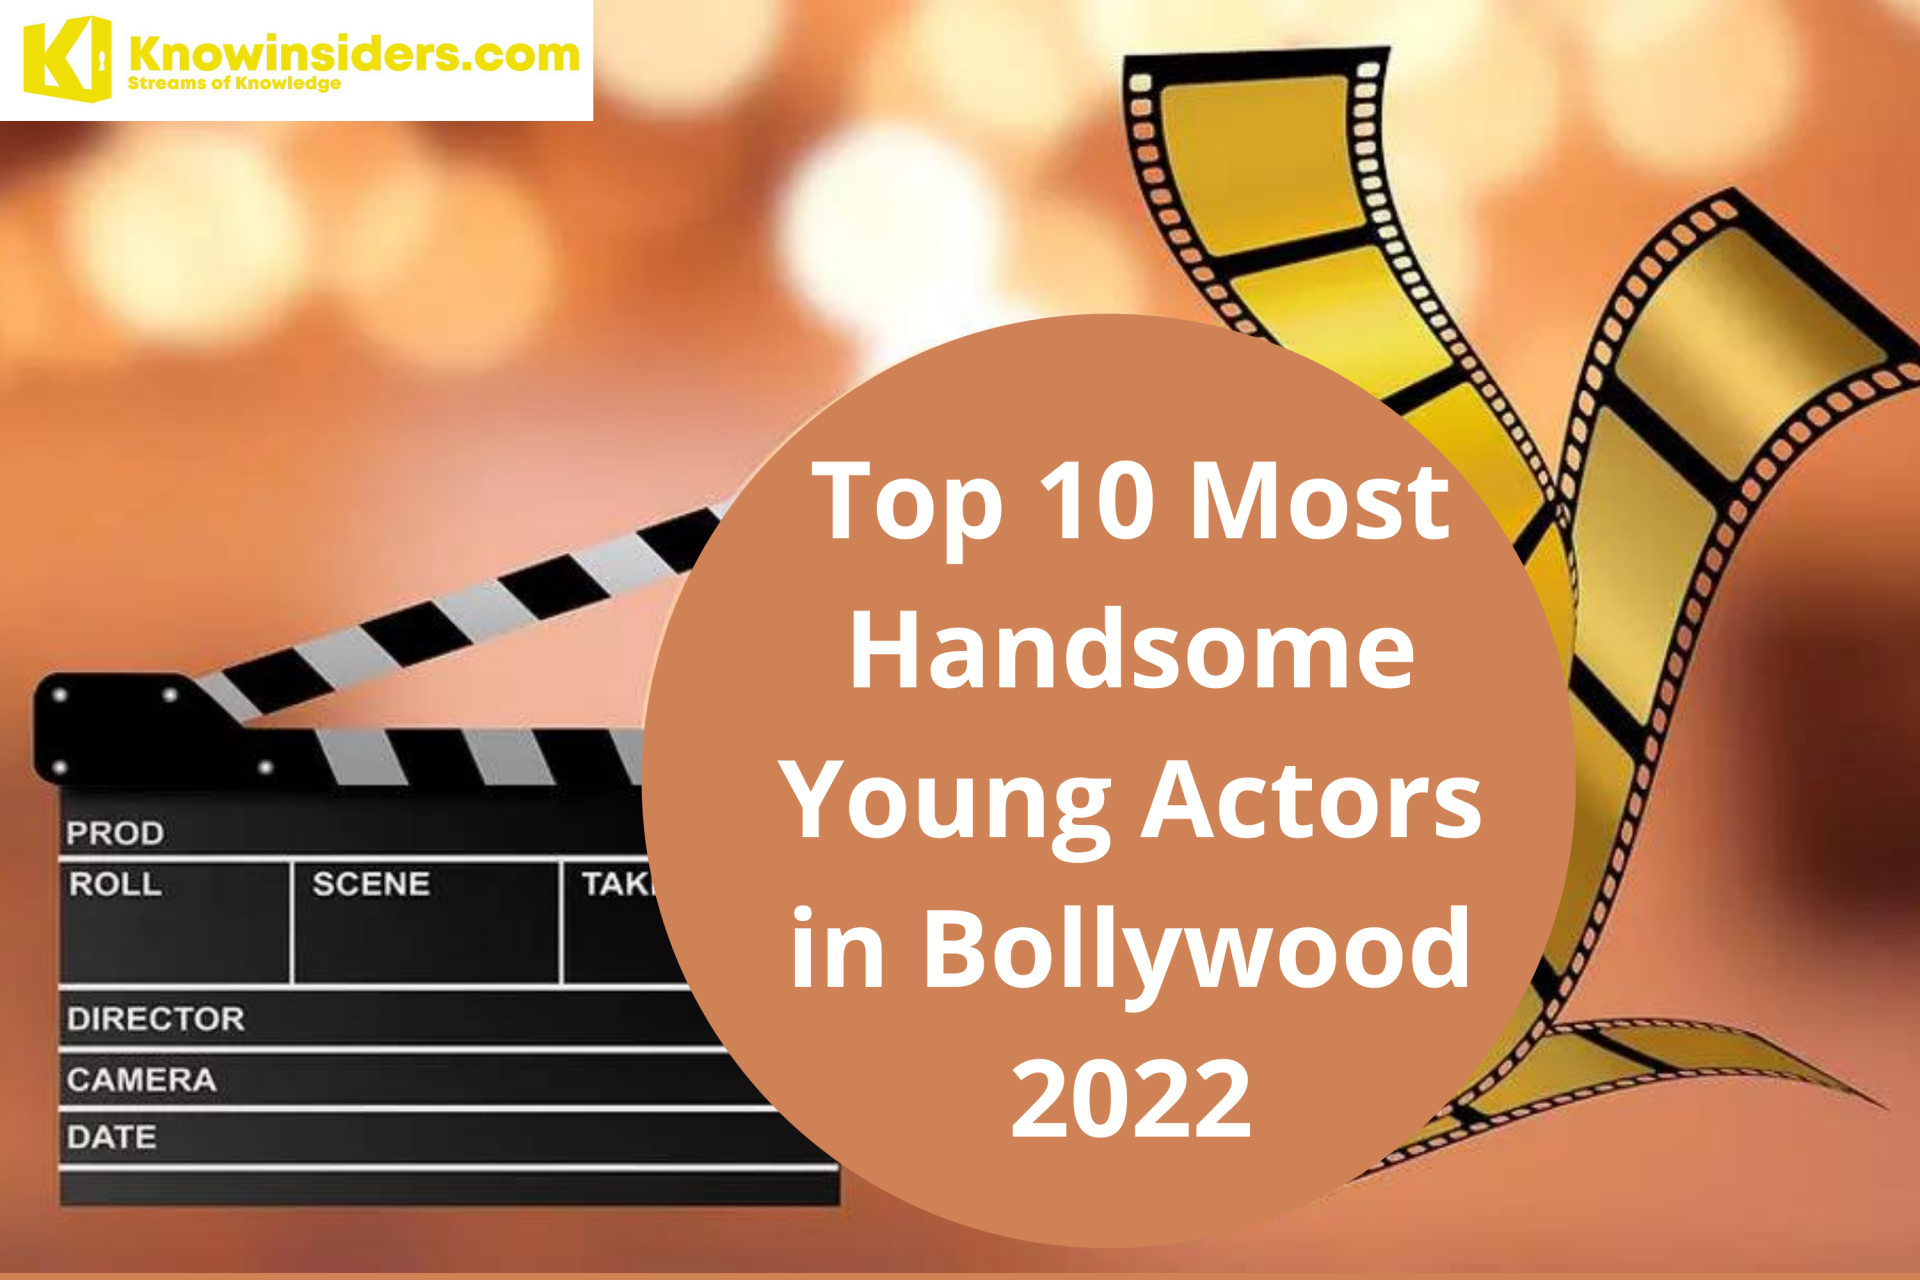 op 10 Most Handsome & Hottest Young Actors in Bollywood 2022